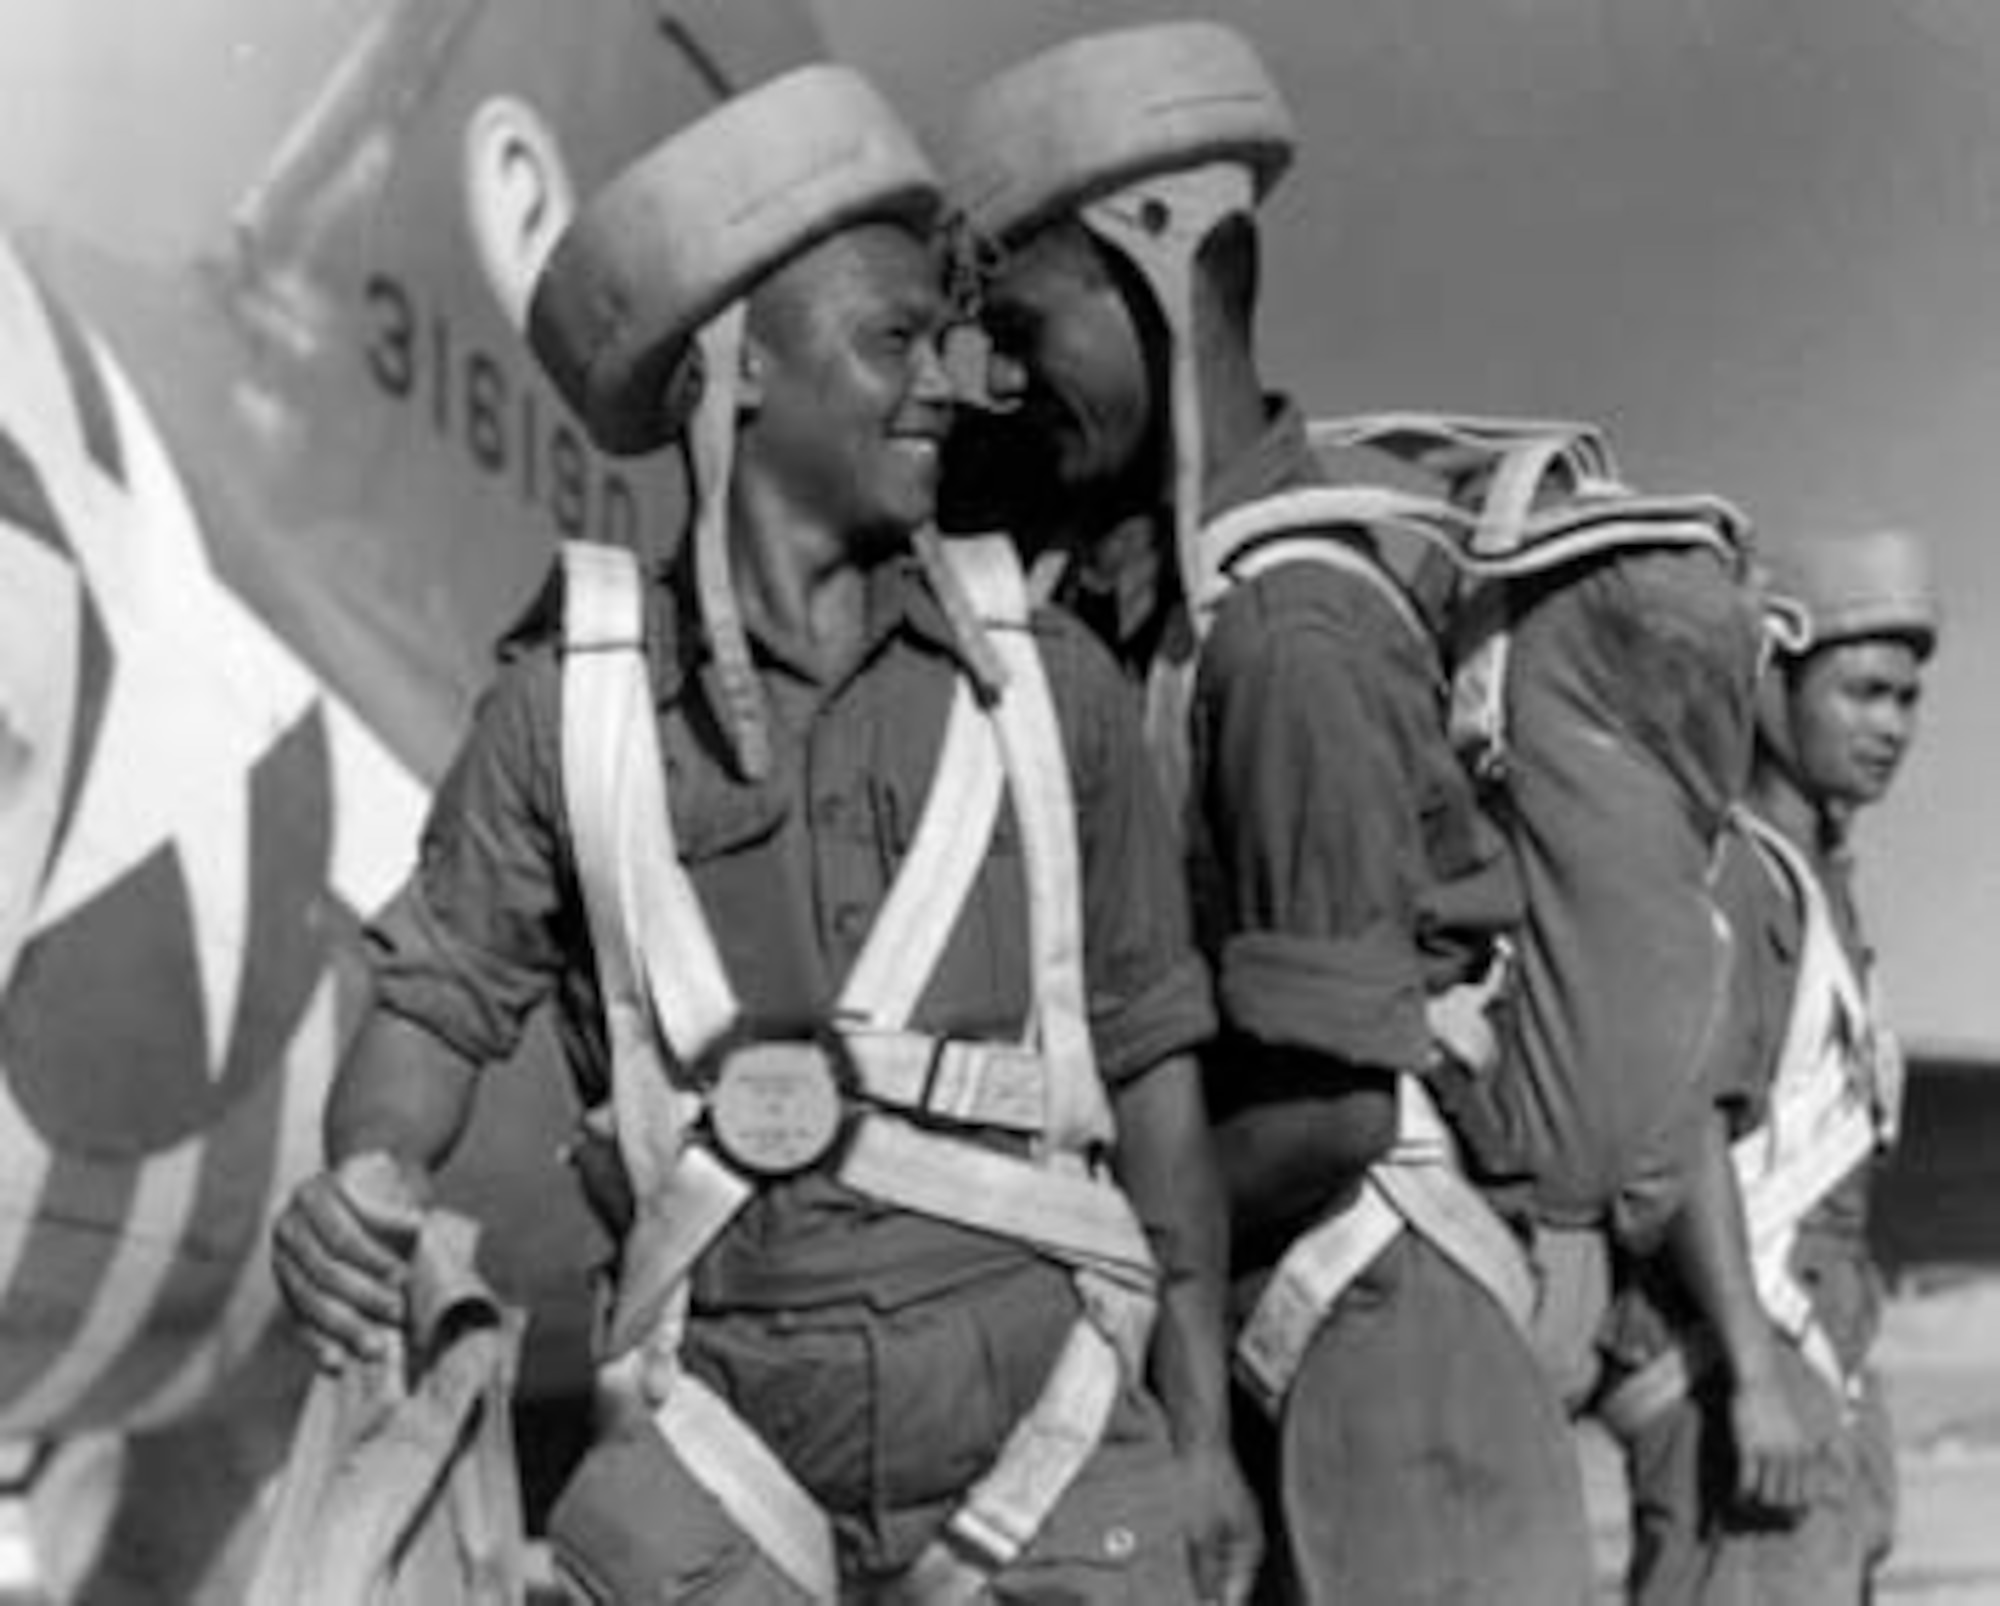 Three Nepalese Gurkhas prepare to board an air commando C-47 bound for Burma. The question mark on the tails of the C-47s came from all the questions air commandos got about the unusual equipment attached to them for snatching gliders.